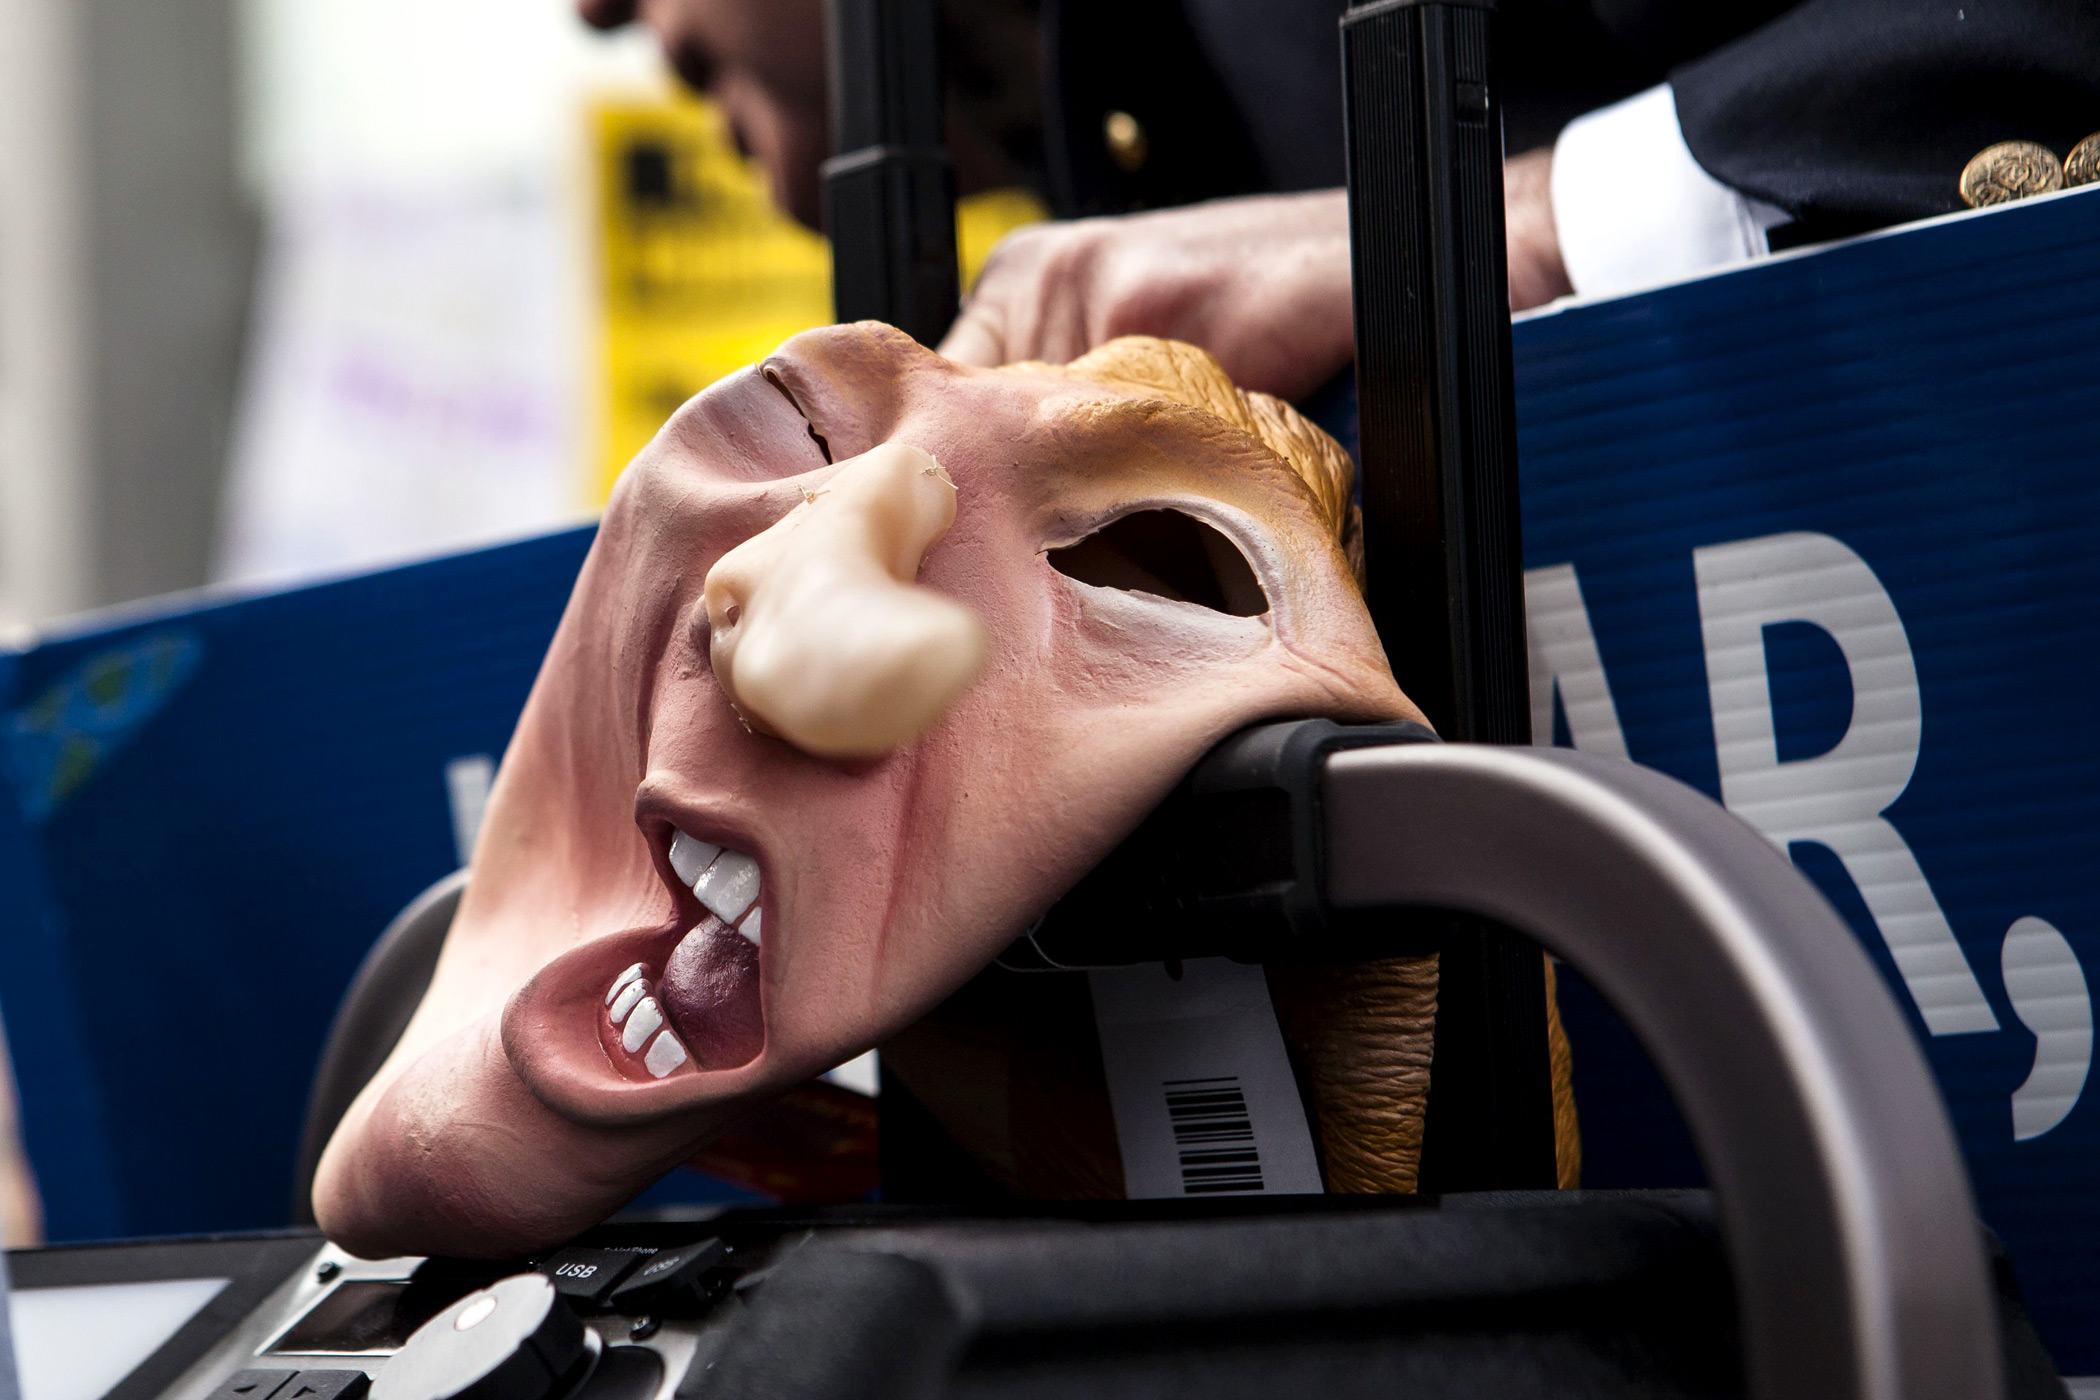 A mask in the likeness of Donald Trump is seen at a protest in New York on March 19.